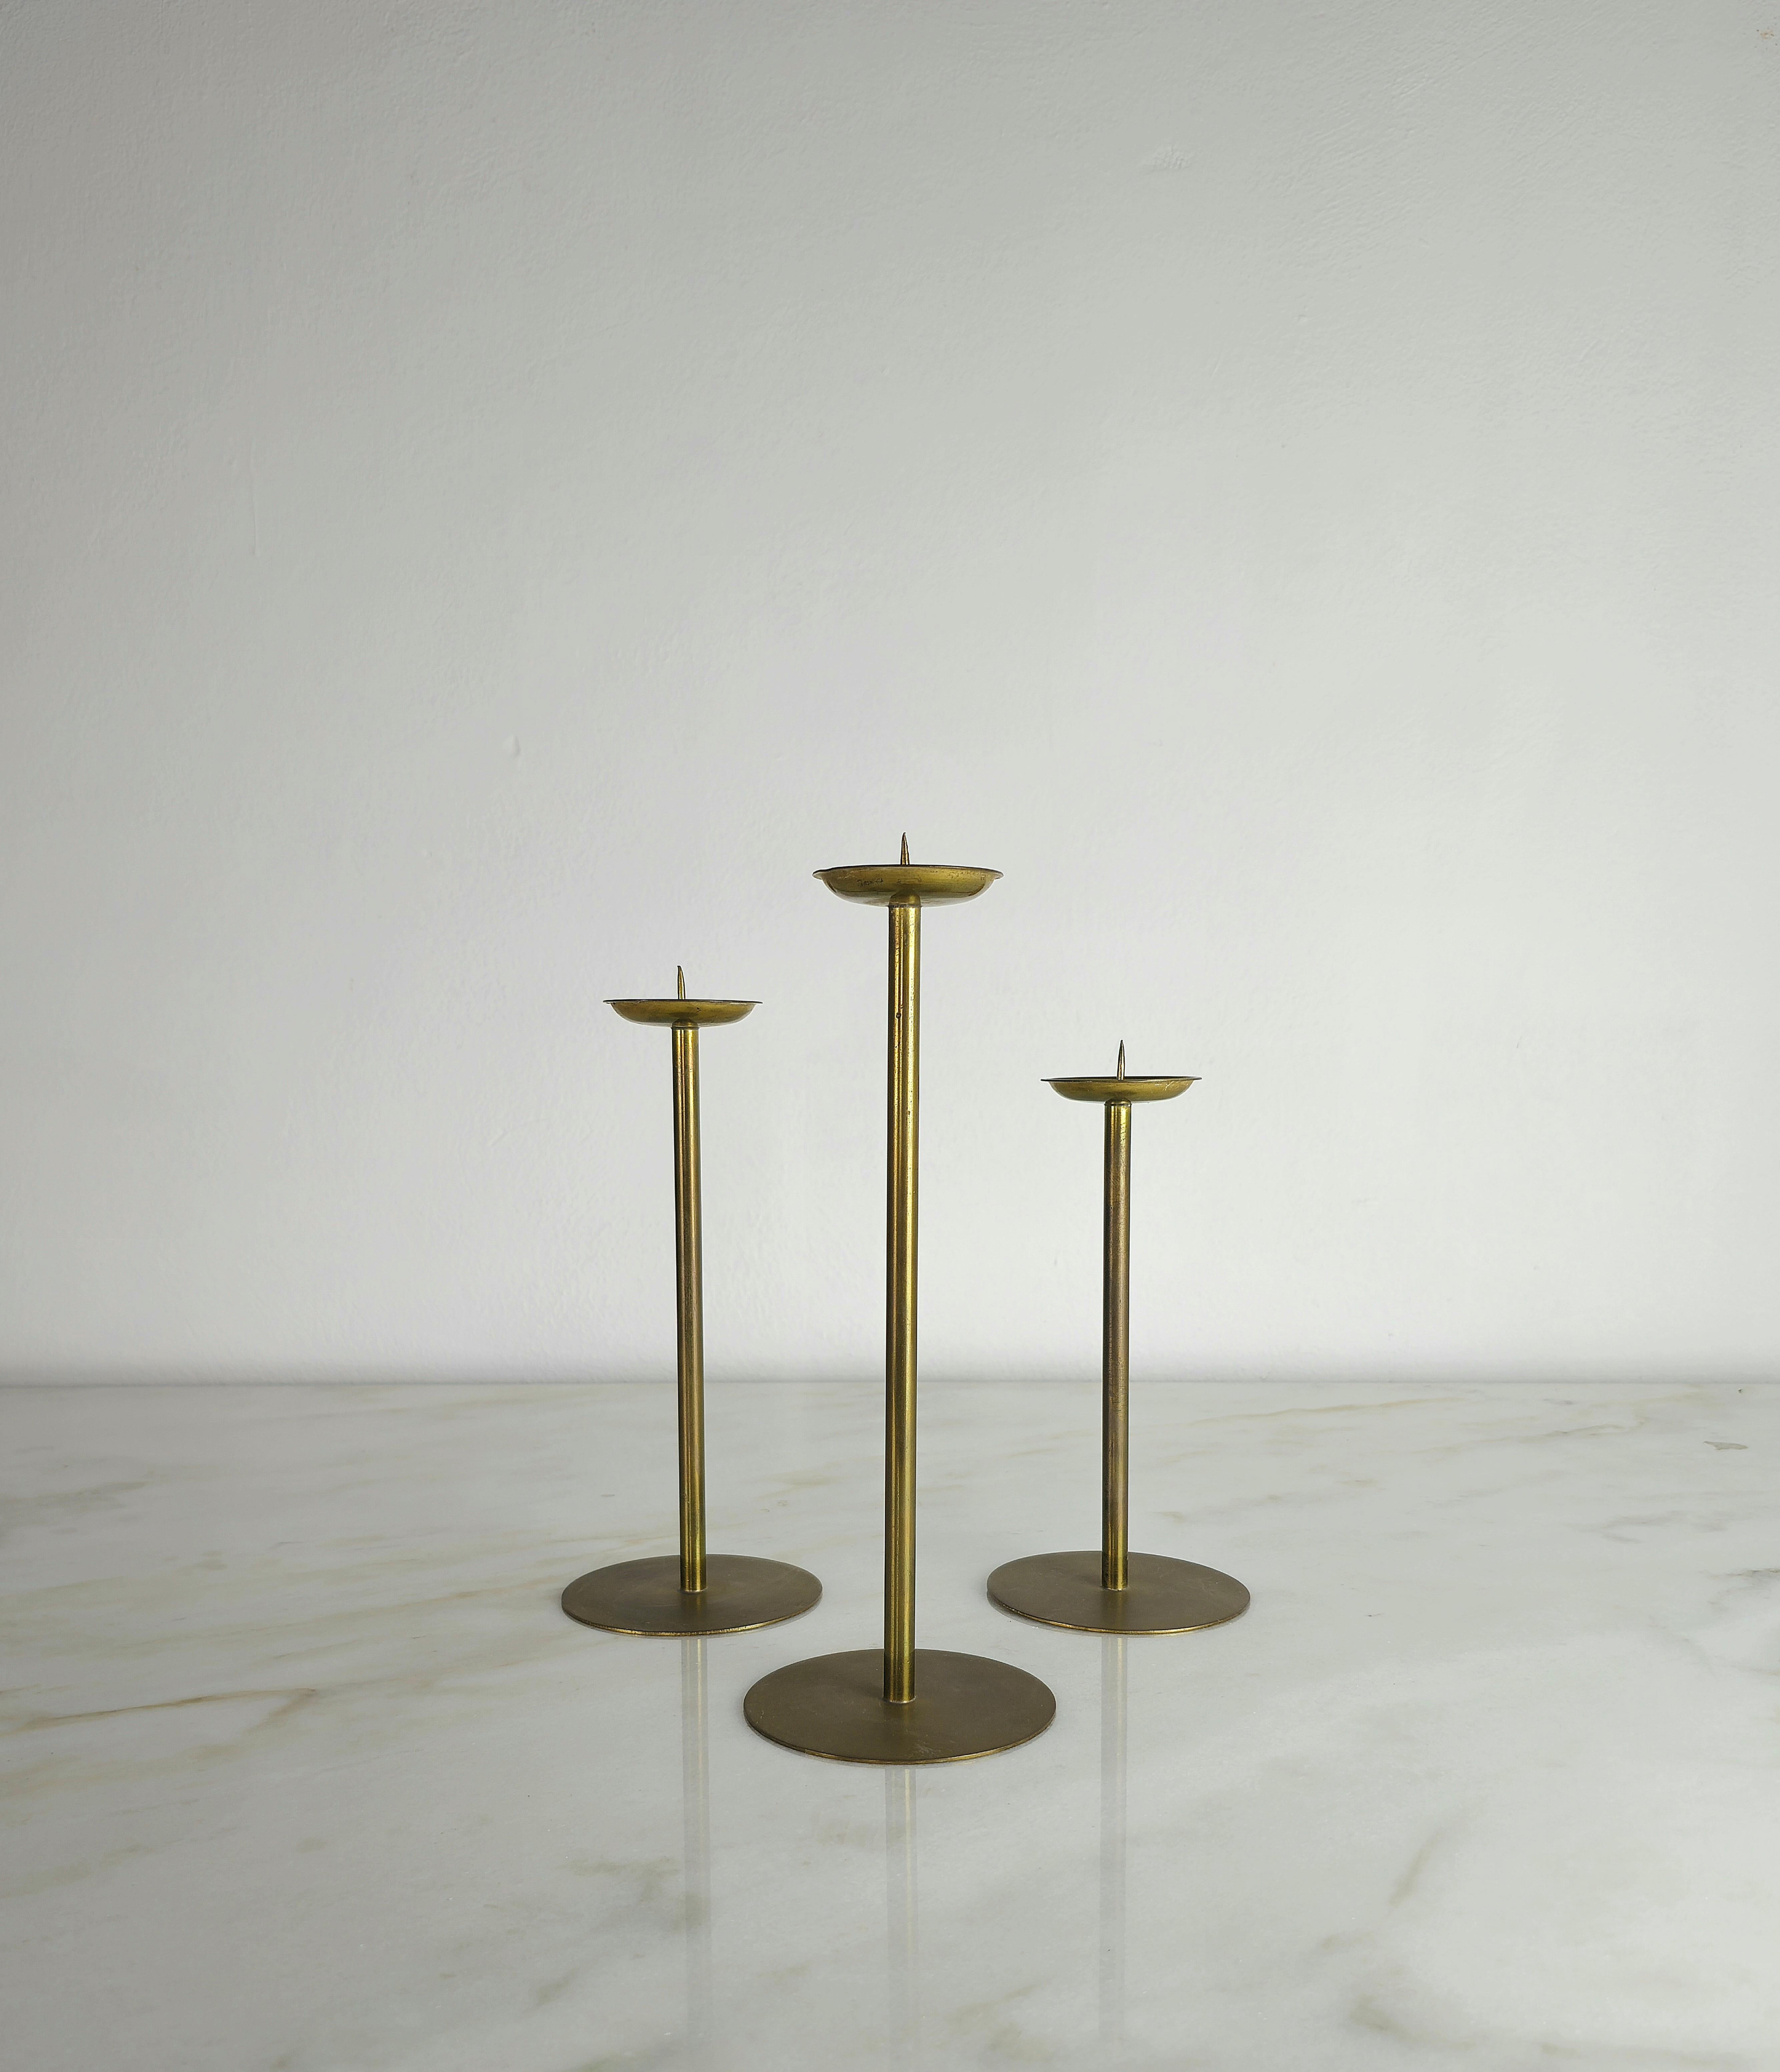 Mid-Century Modern Candle Holders Candlesticks Decorative Objects Brass Midcentury 1960s Set of 3 For Sale